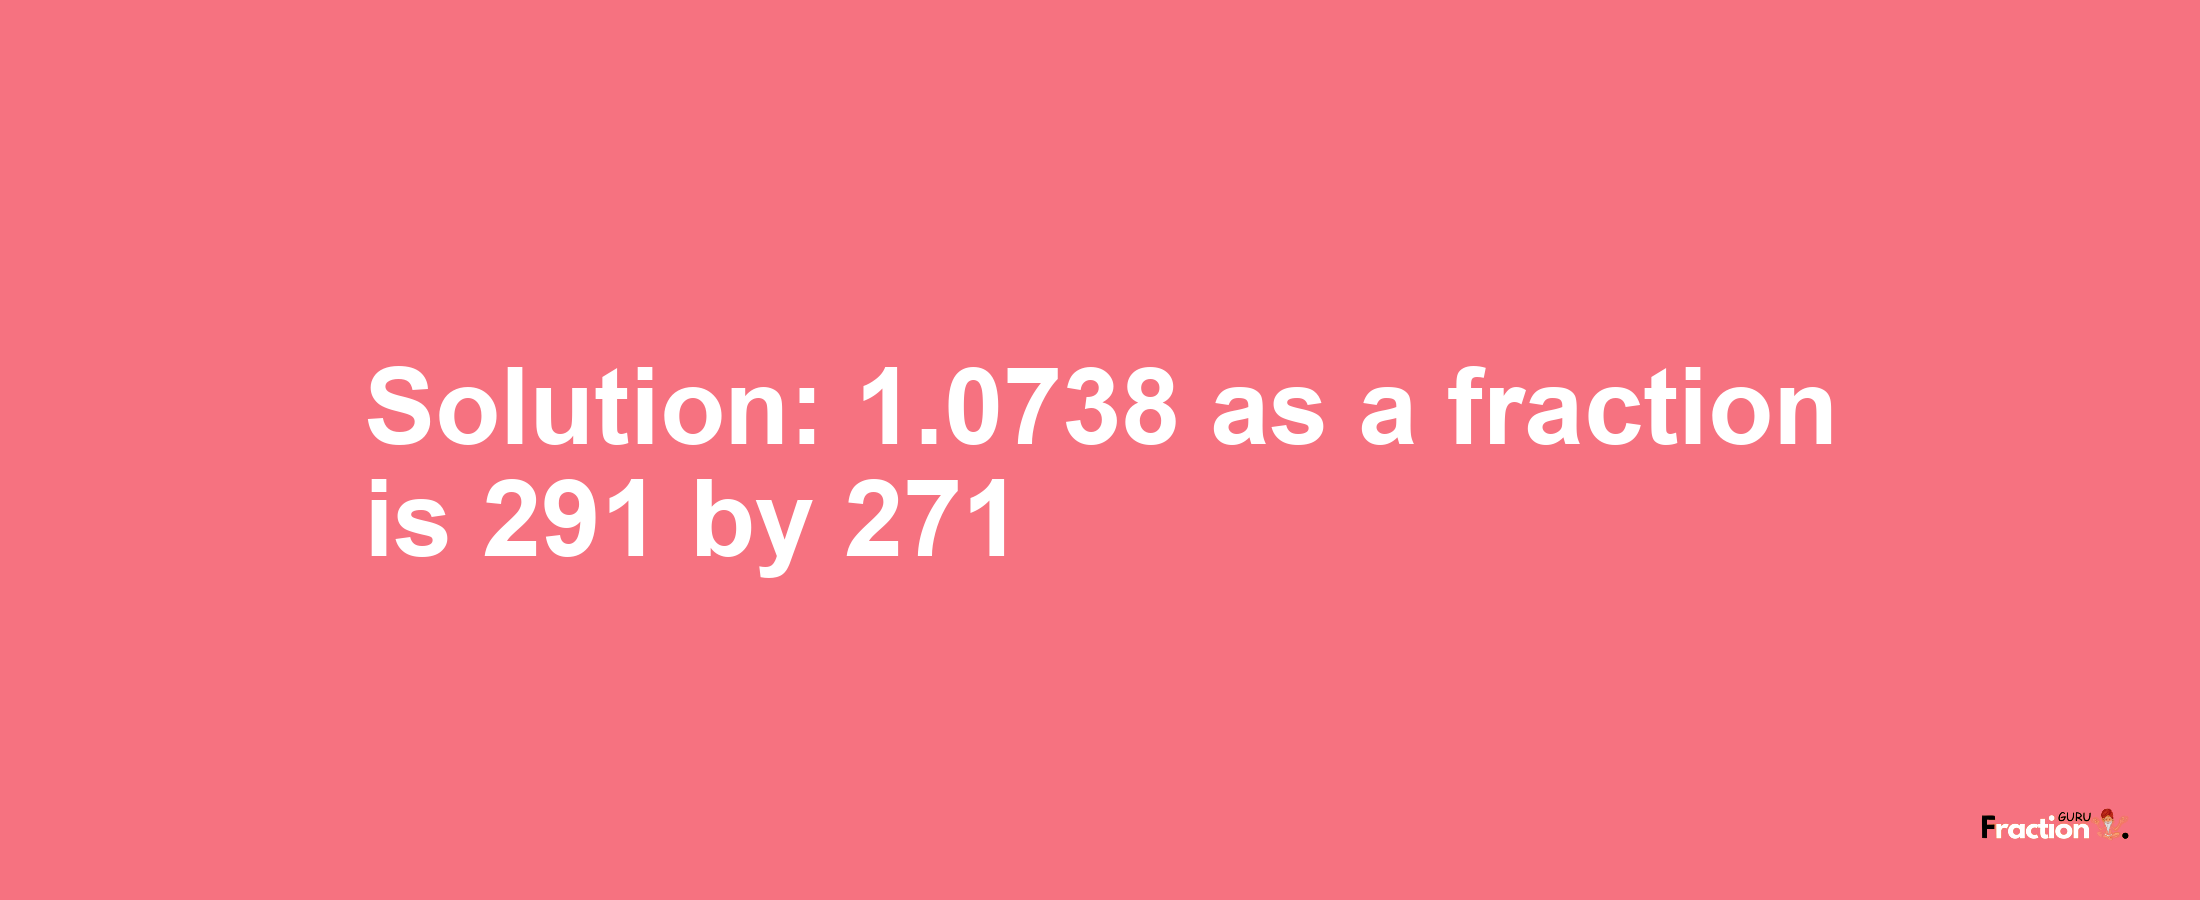 Solution:1.0738 as a fraction is 291/271